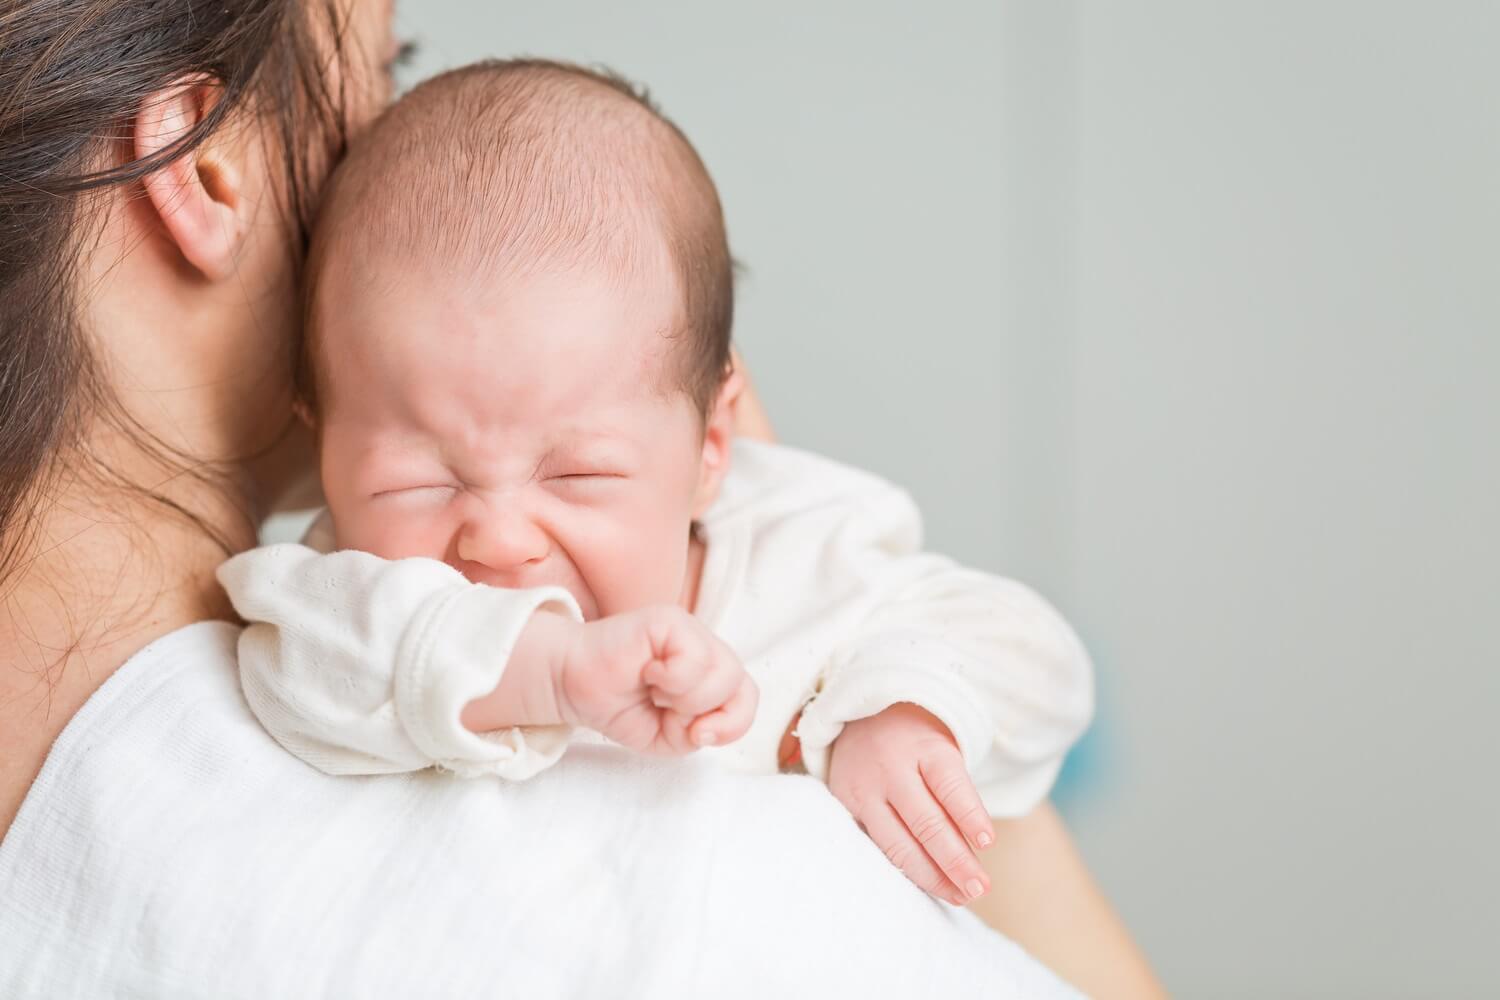 How to Calm Colicky Babies